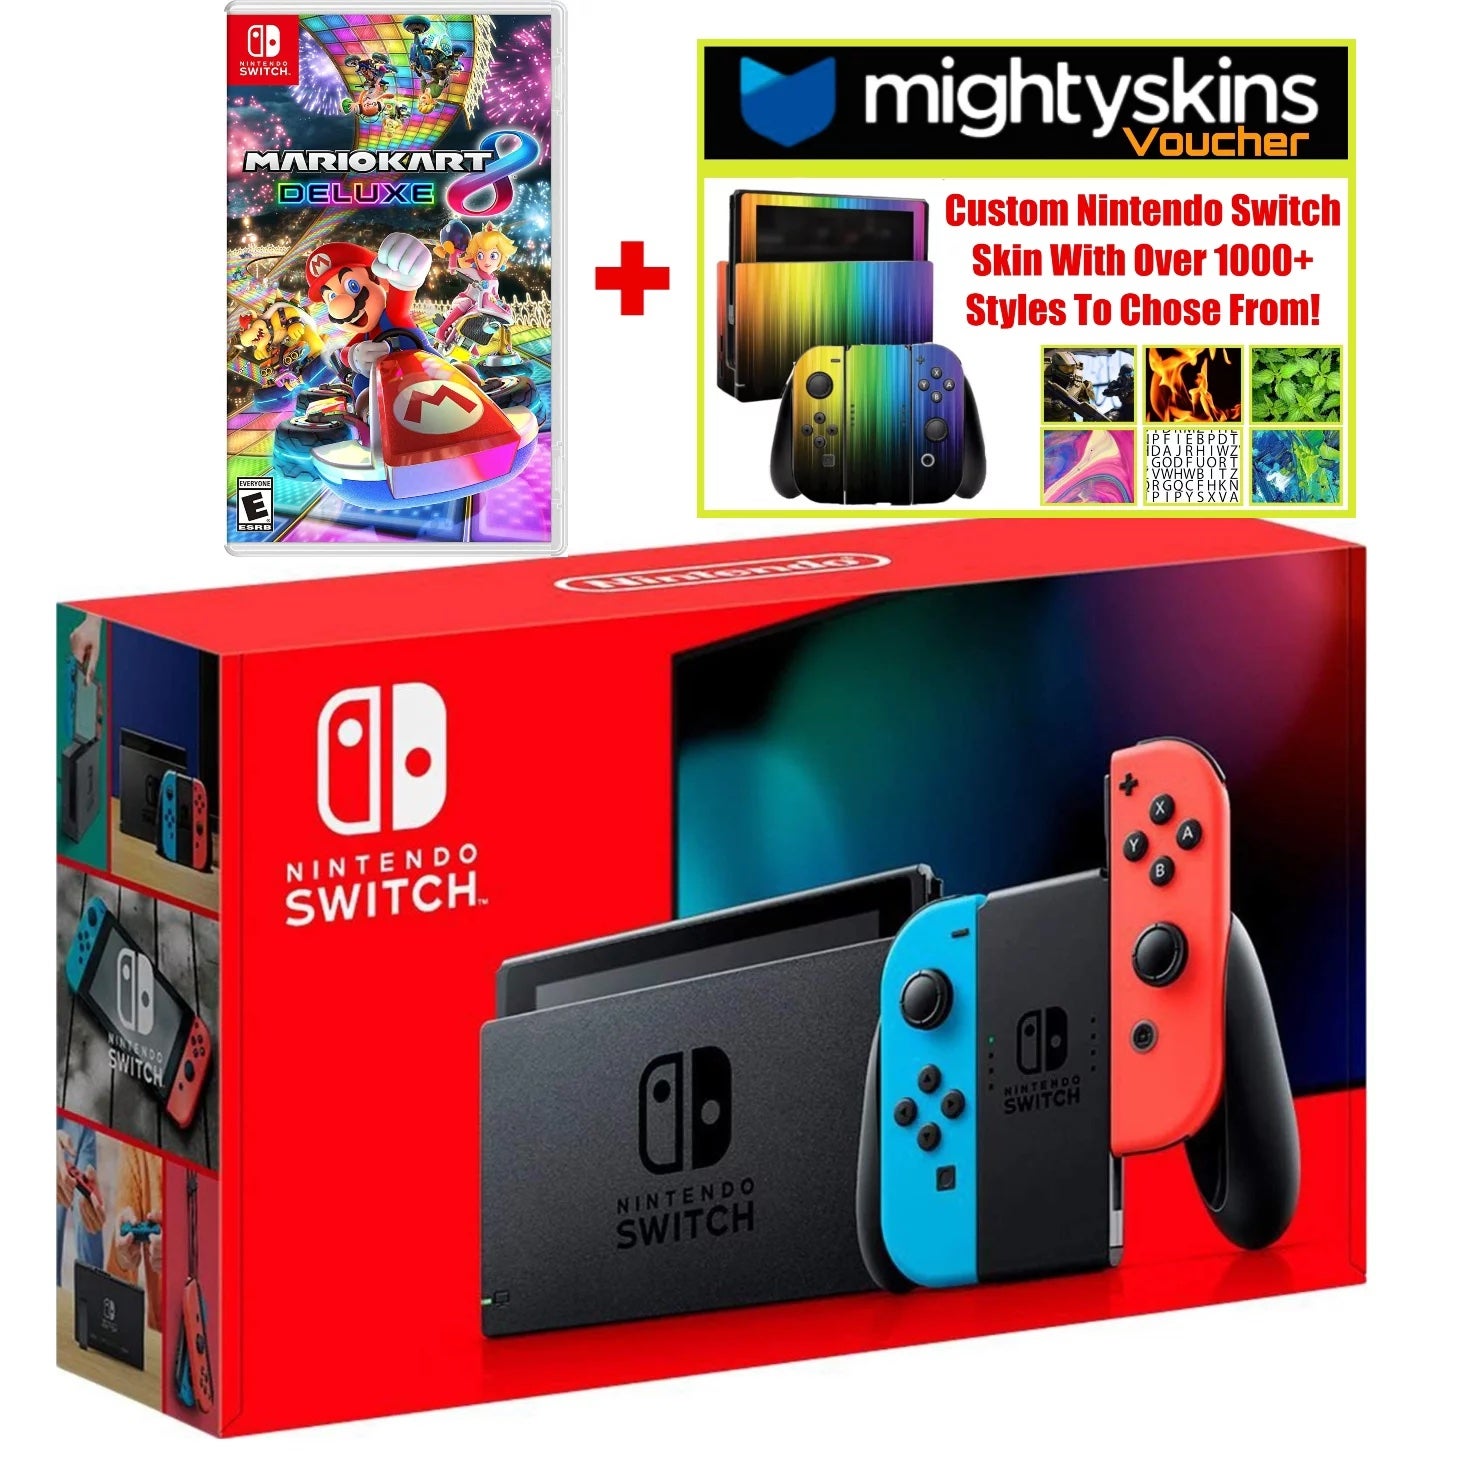 Nintendo Switch's Black Friday deals offers hundreds of discounts on the  eShop, including first party titles - Meristation